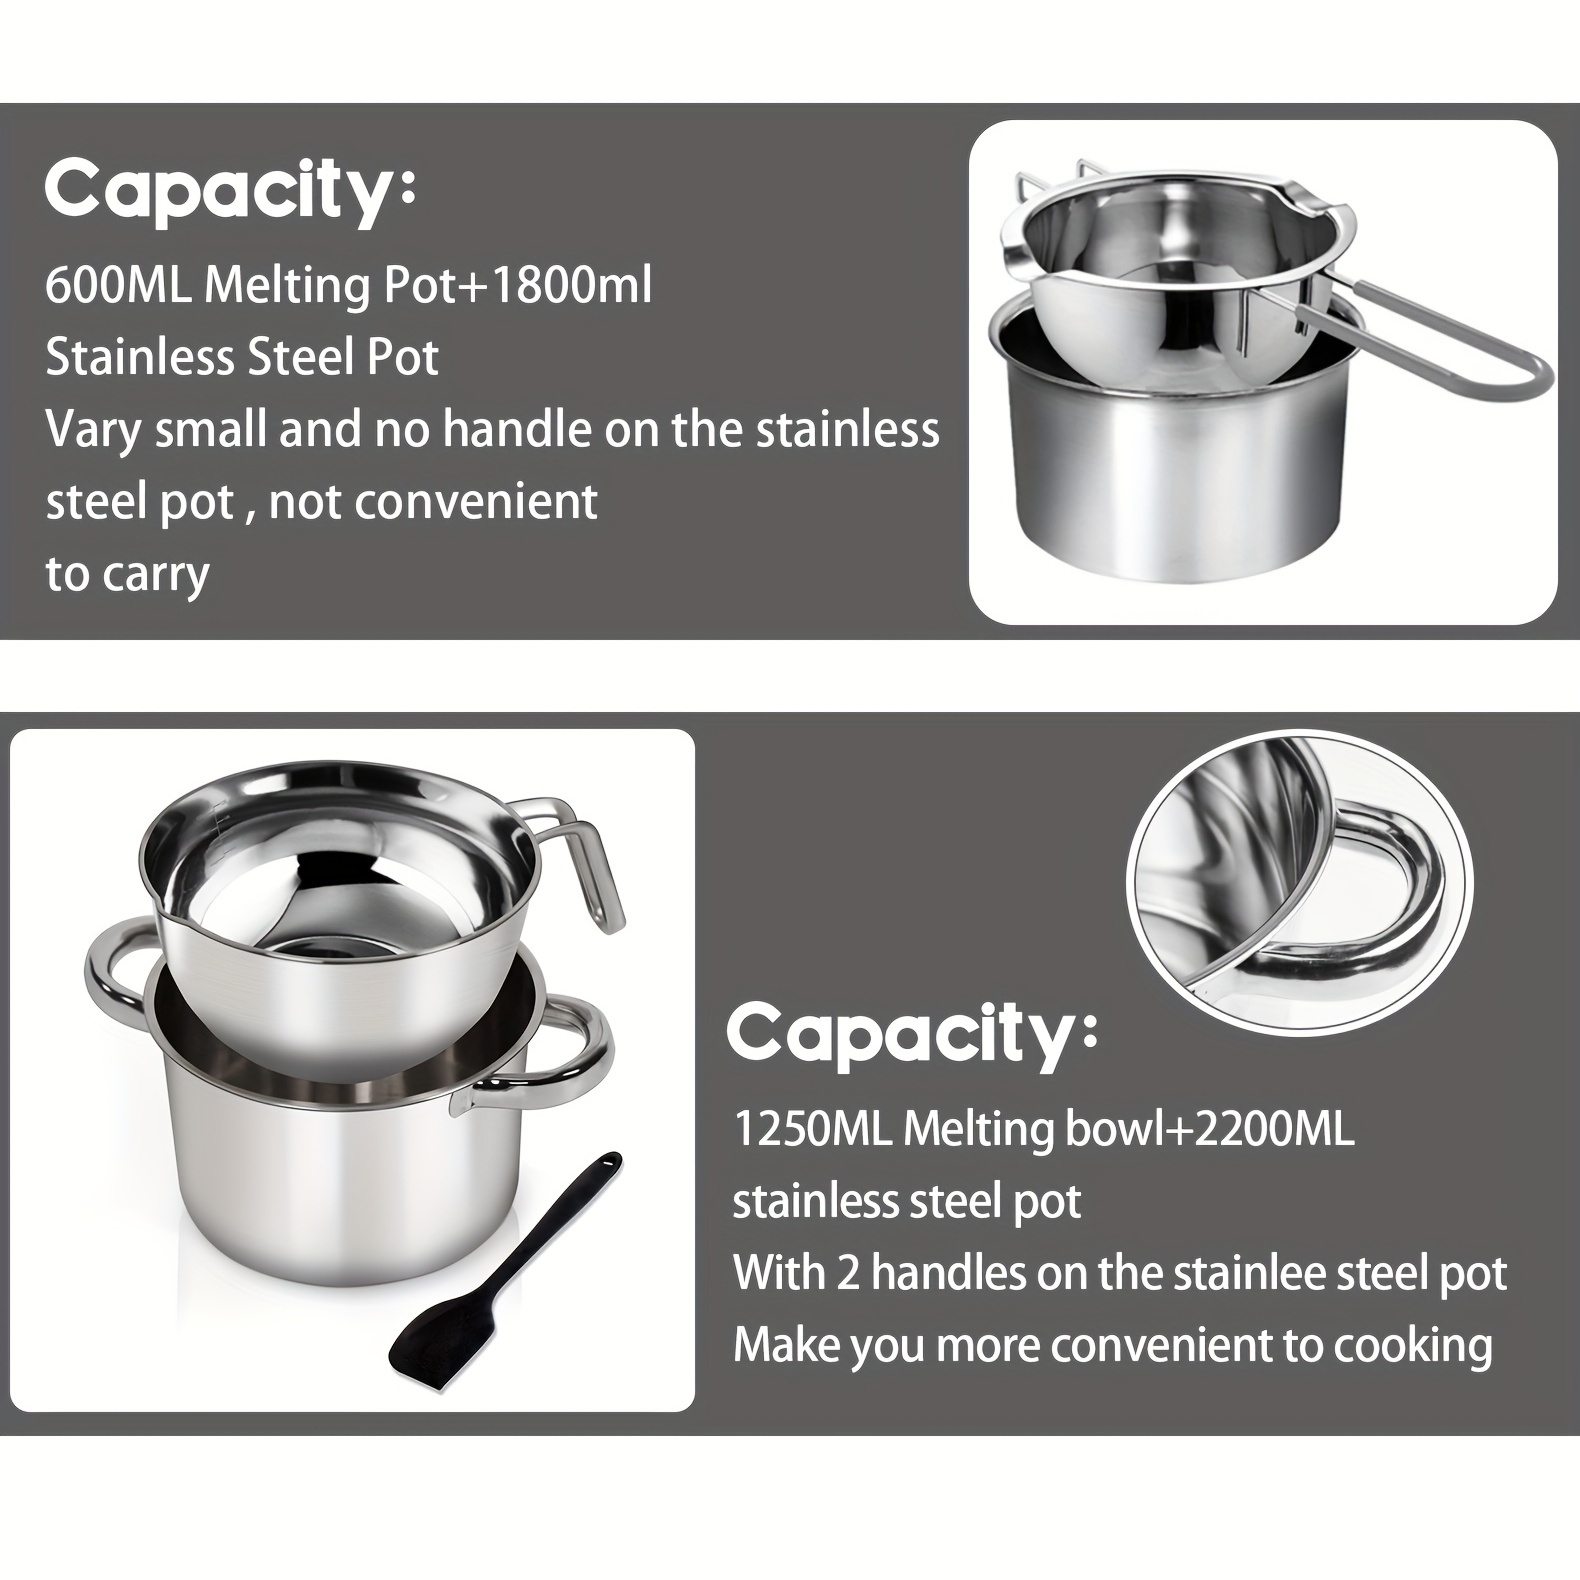 SONGZIMING 1000ml Upgrade Double Boiler Stainless Steel Melting Pot for Chocolate, Candle and Candy Making (34oz)